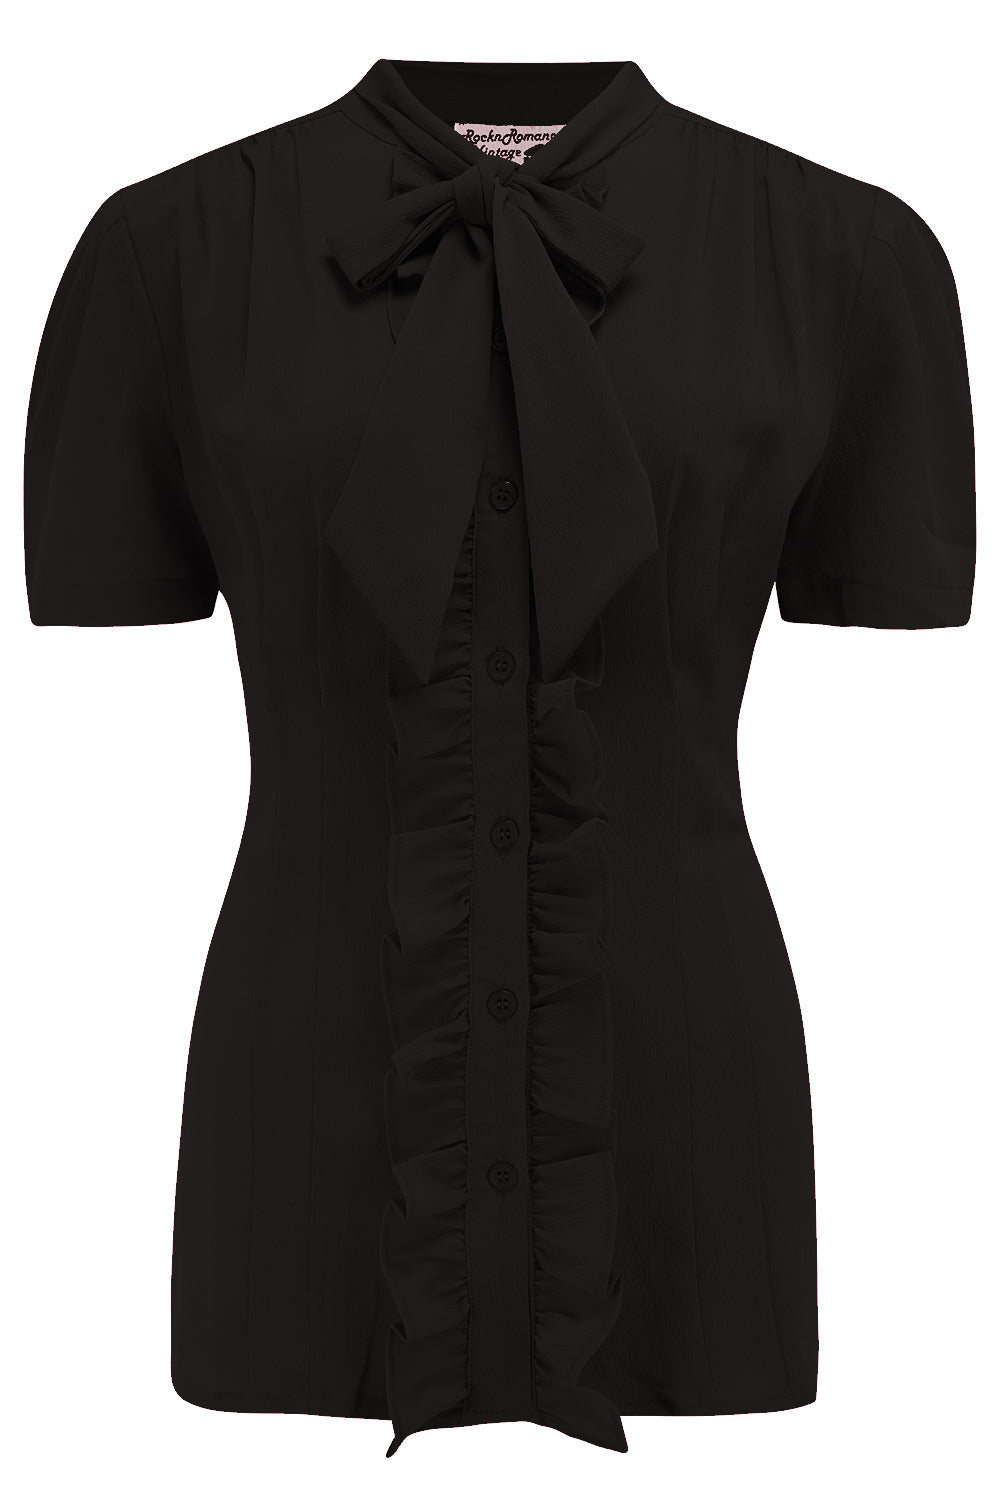 **Sample Sale** The "Betsy" Ruffle, Pussybow Blouse in Solid Black, True & Authentic 1950s Vintage Style - True and authentic vintage style clothing, inspired by the Classic styles of CC41 , WW2 and the fun 1950s RocknRoll era, for everyday wear plus events like Goodwood Revival, Twinwood Festival and Viva Las Vegas Rockabilly Weekend Rock n Romance Rock n Romance